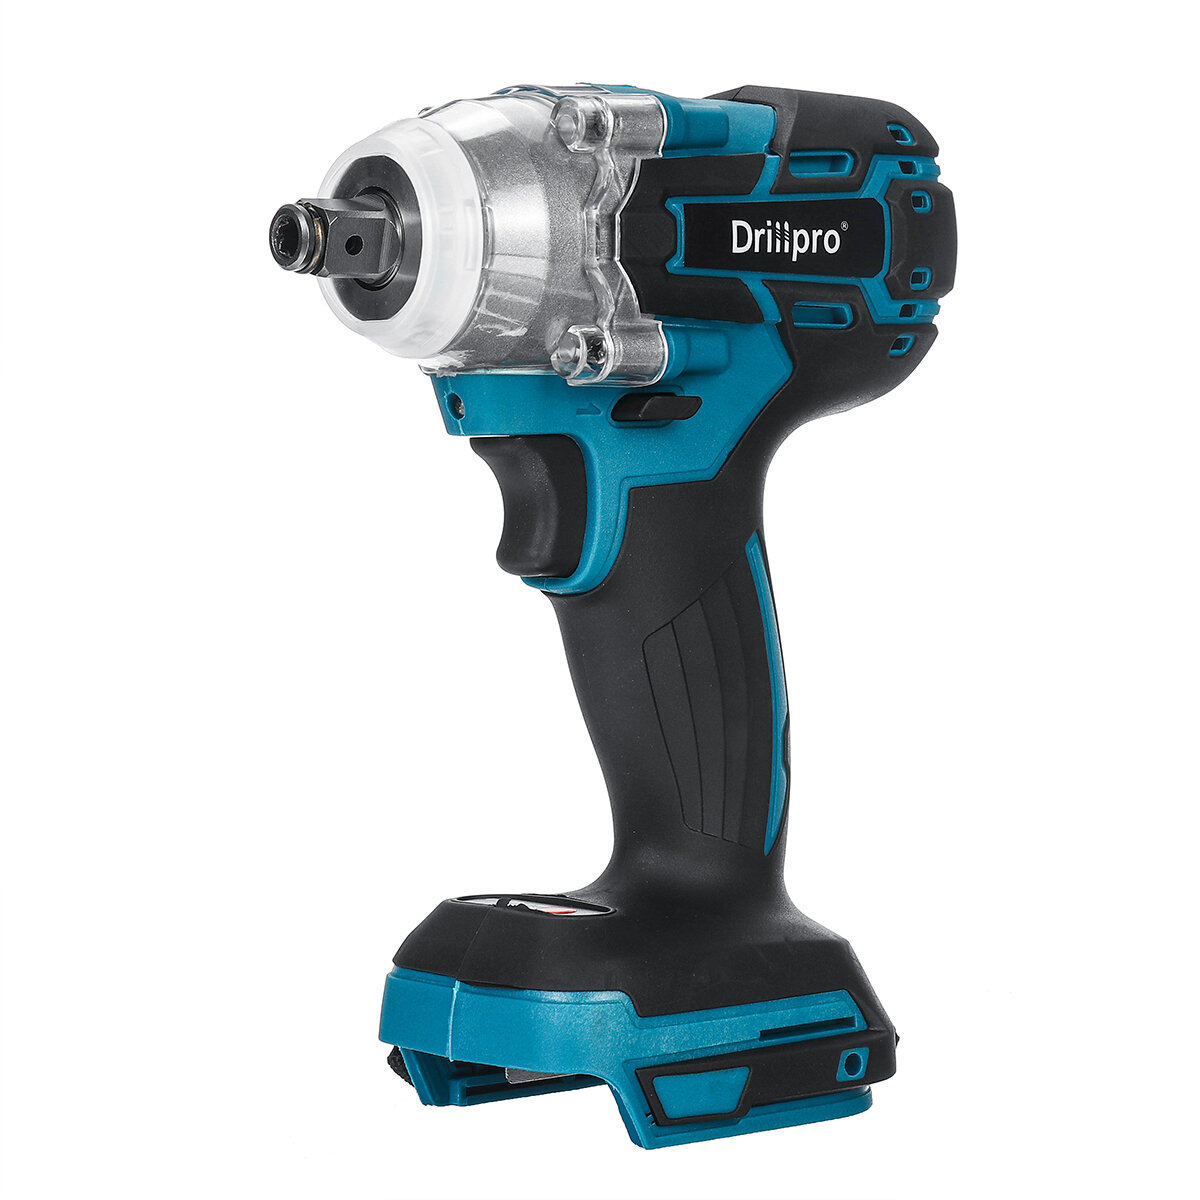 Drillpro 18V Cordless Brushless Impact Wrench Screwdriver Stepless Speed Change Switch Adapted...